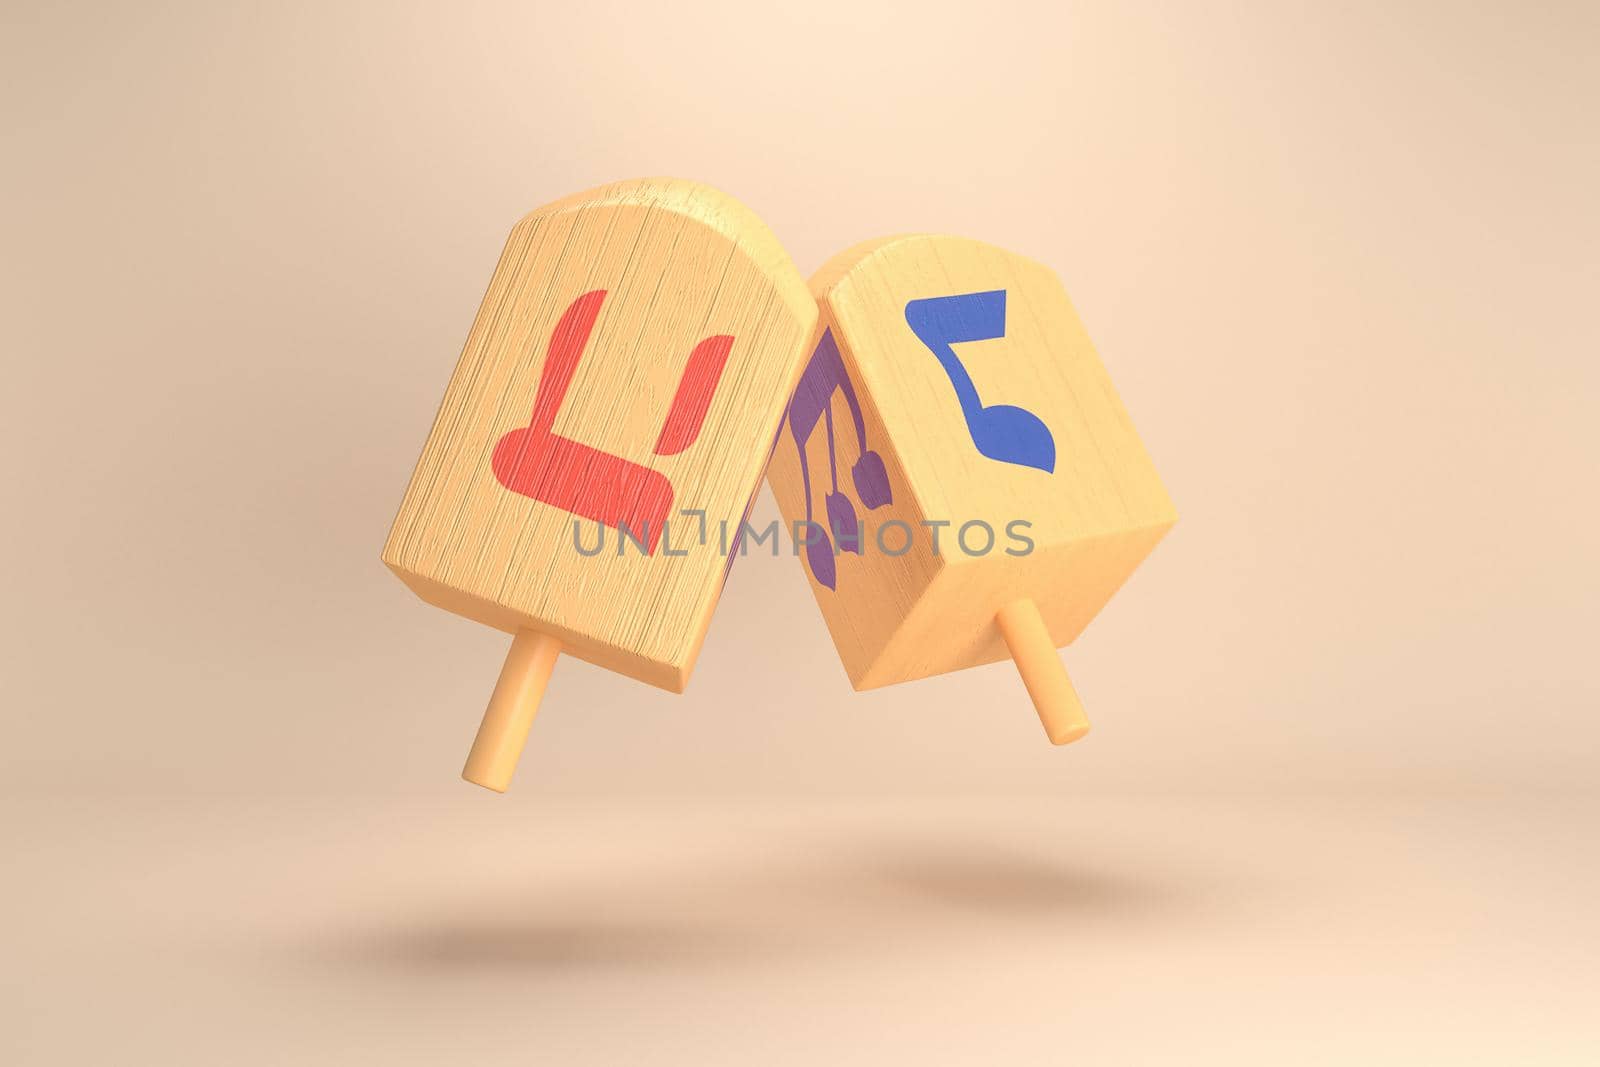 3d rendering Image of Jewish holiday Hanukkah with  wooden dreidels or spinning top on a  yellow background.